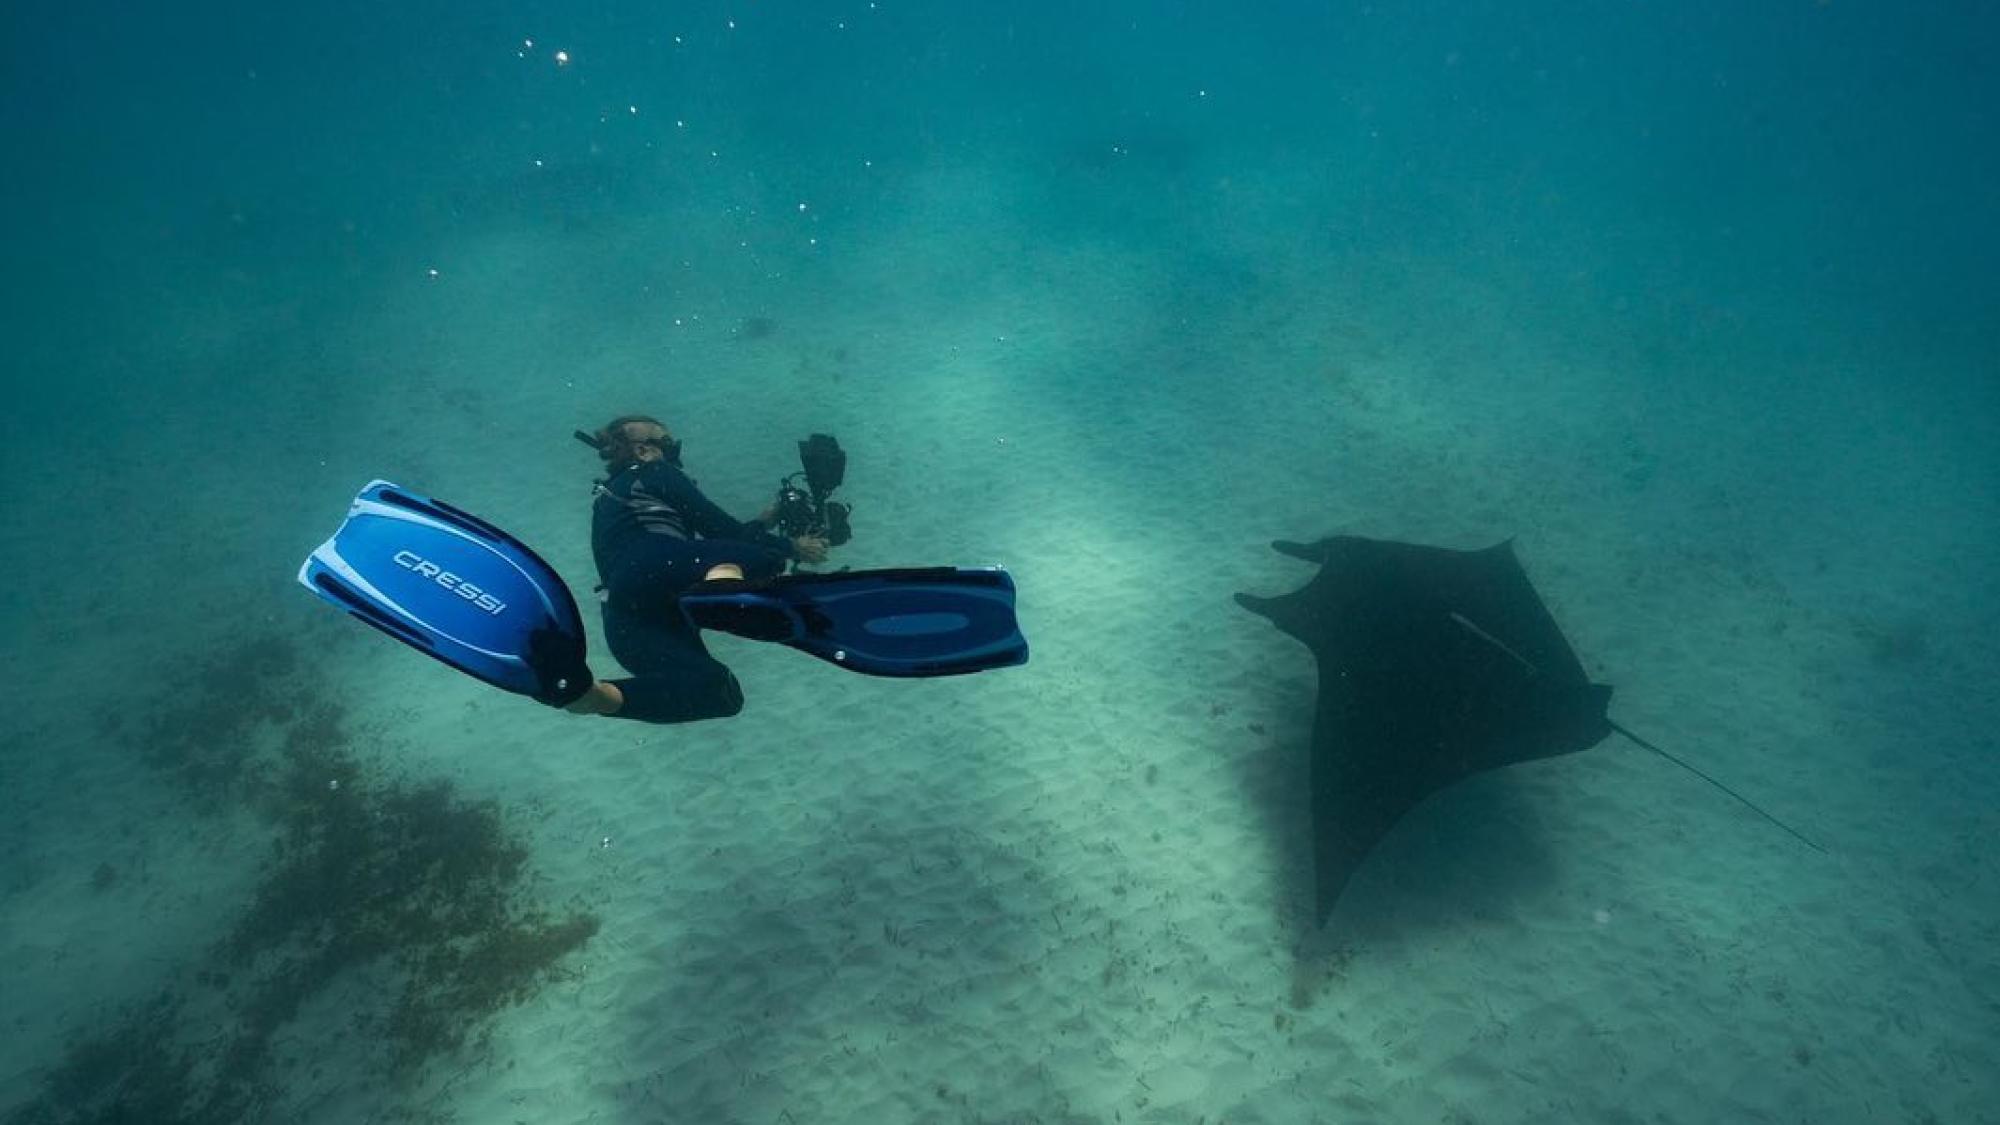 Nate Porter up close and personal with a manta ray